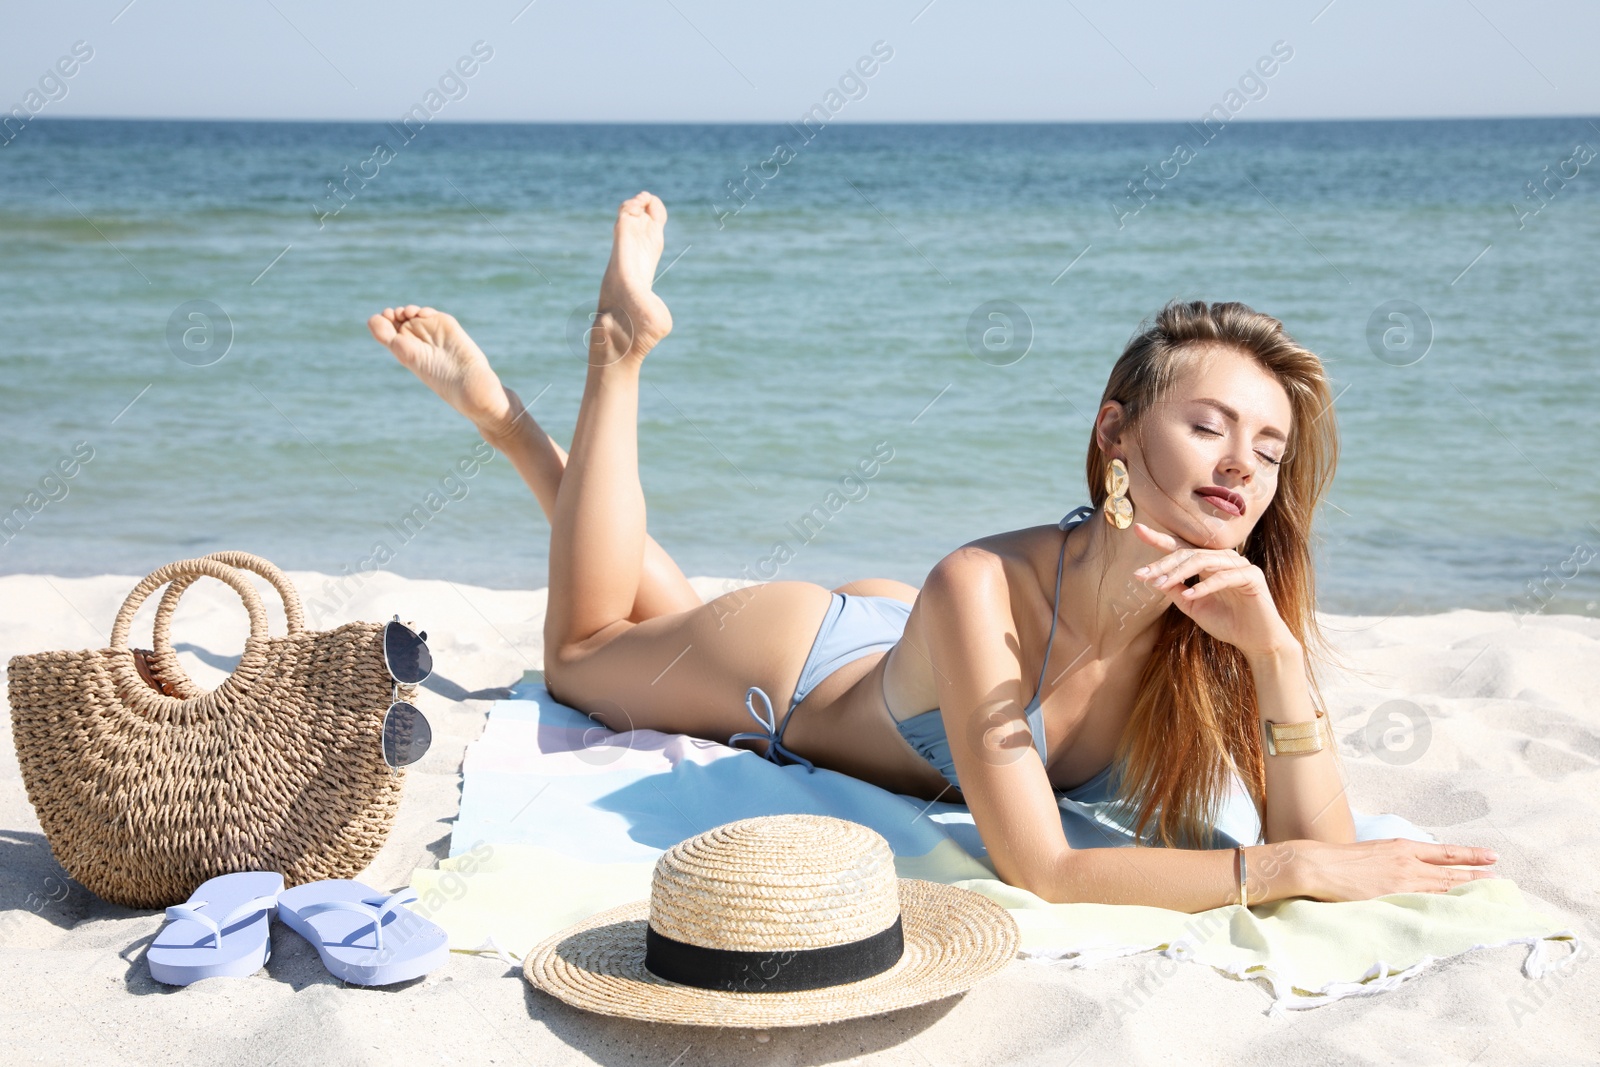 Photo of Beautiful woman with bag and other beach stuff on sand near sea